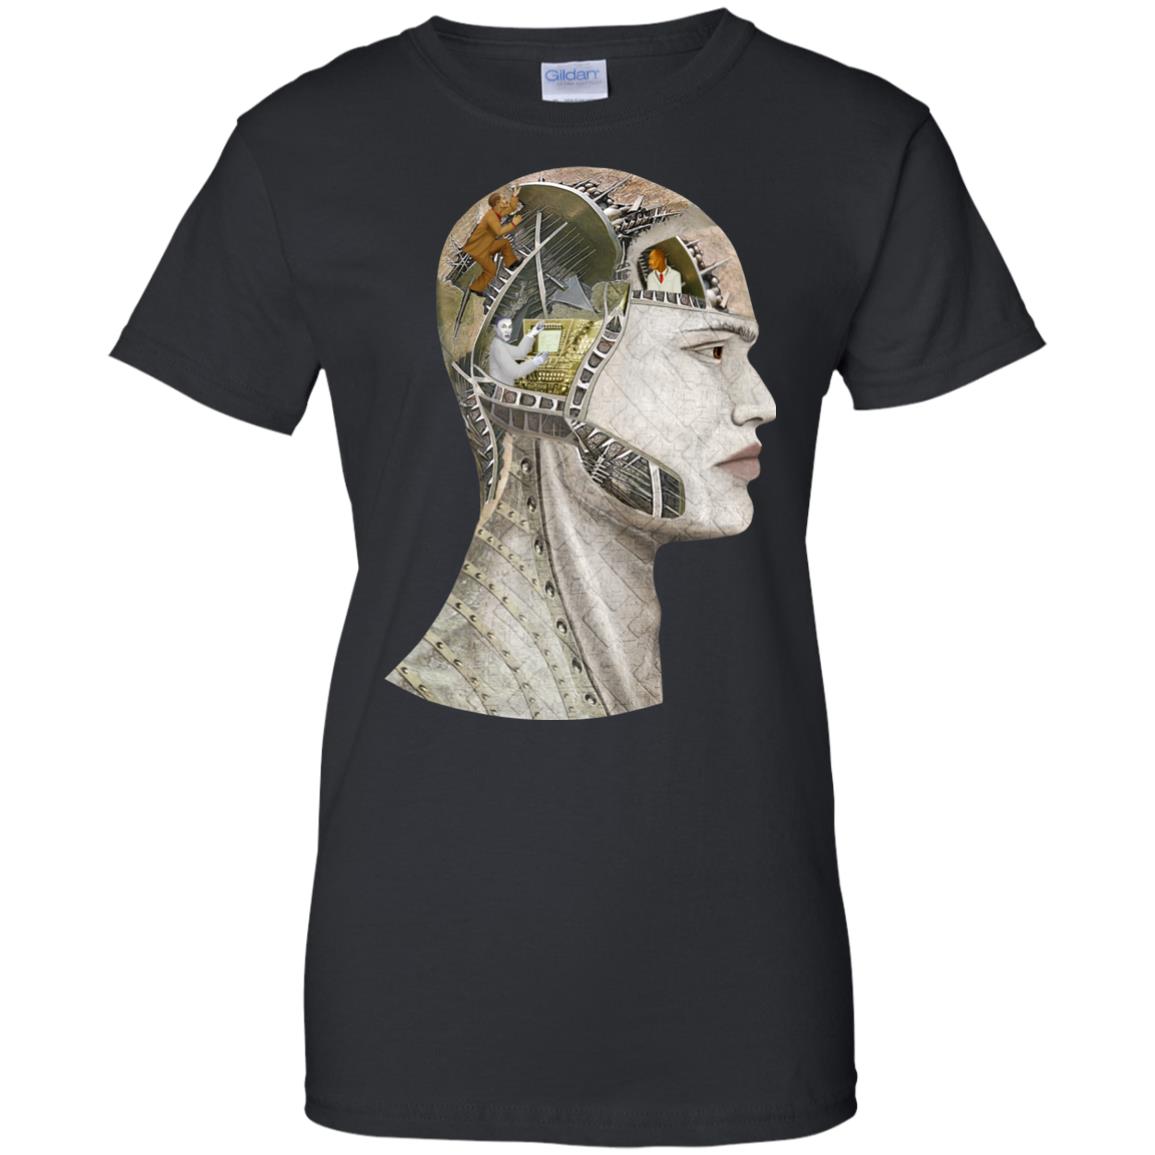 Who's Driving - Women's Relaxed Fit T-Shirt